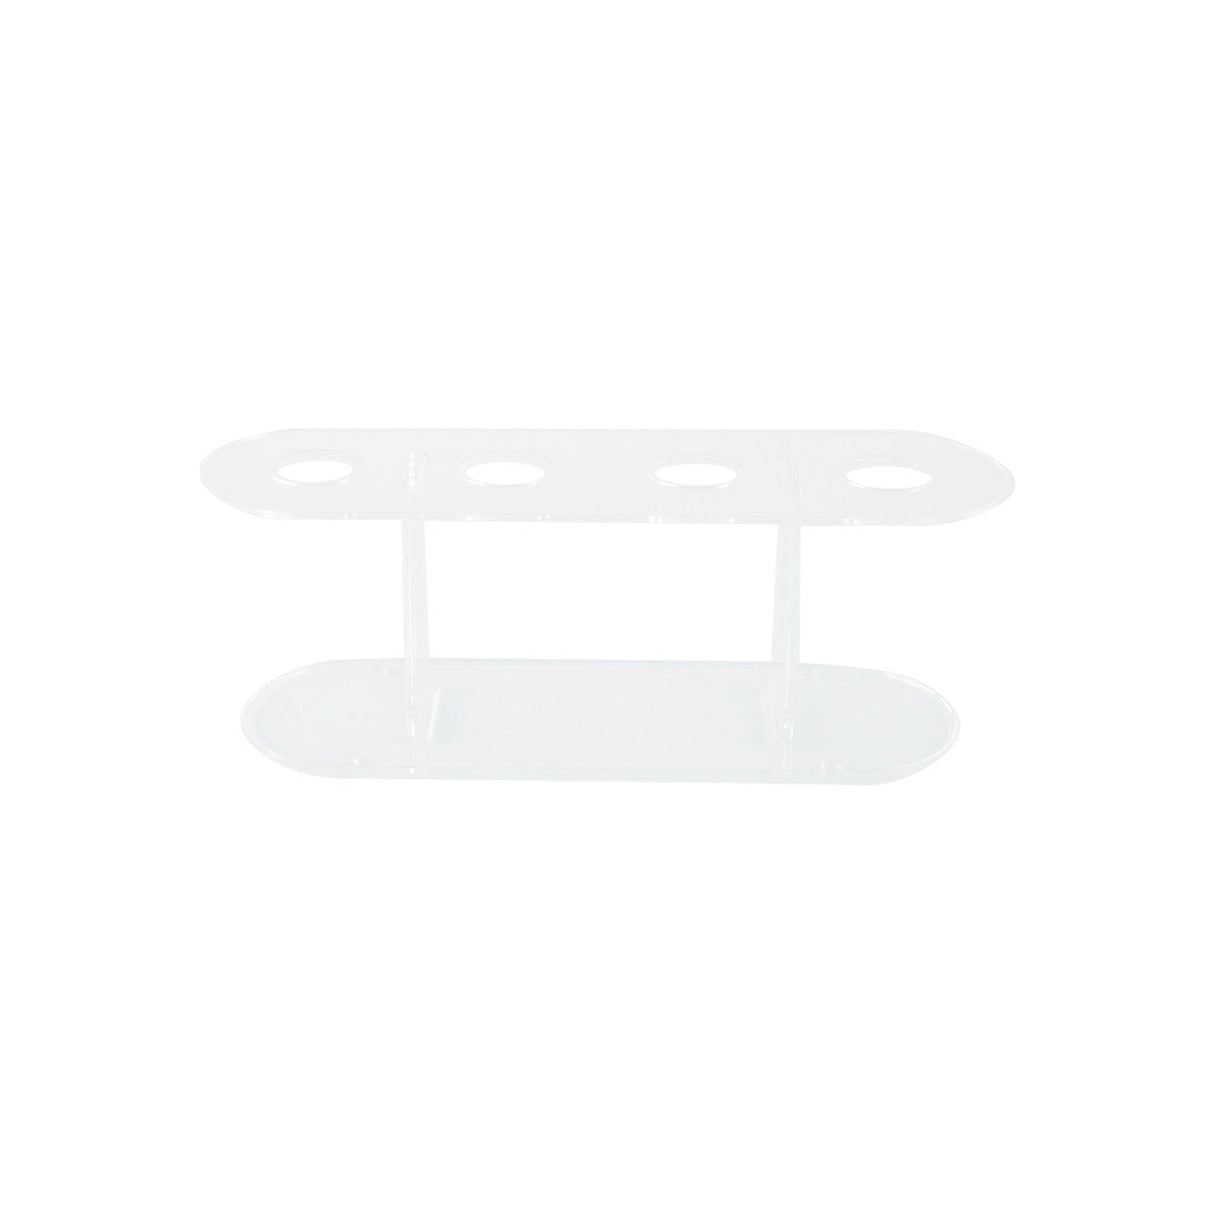 Cone Holder Stand Acrylic 4-Hole